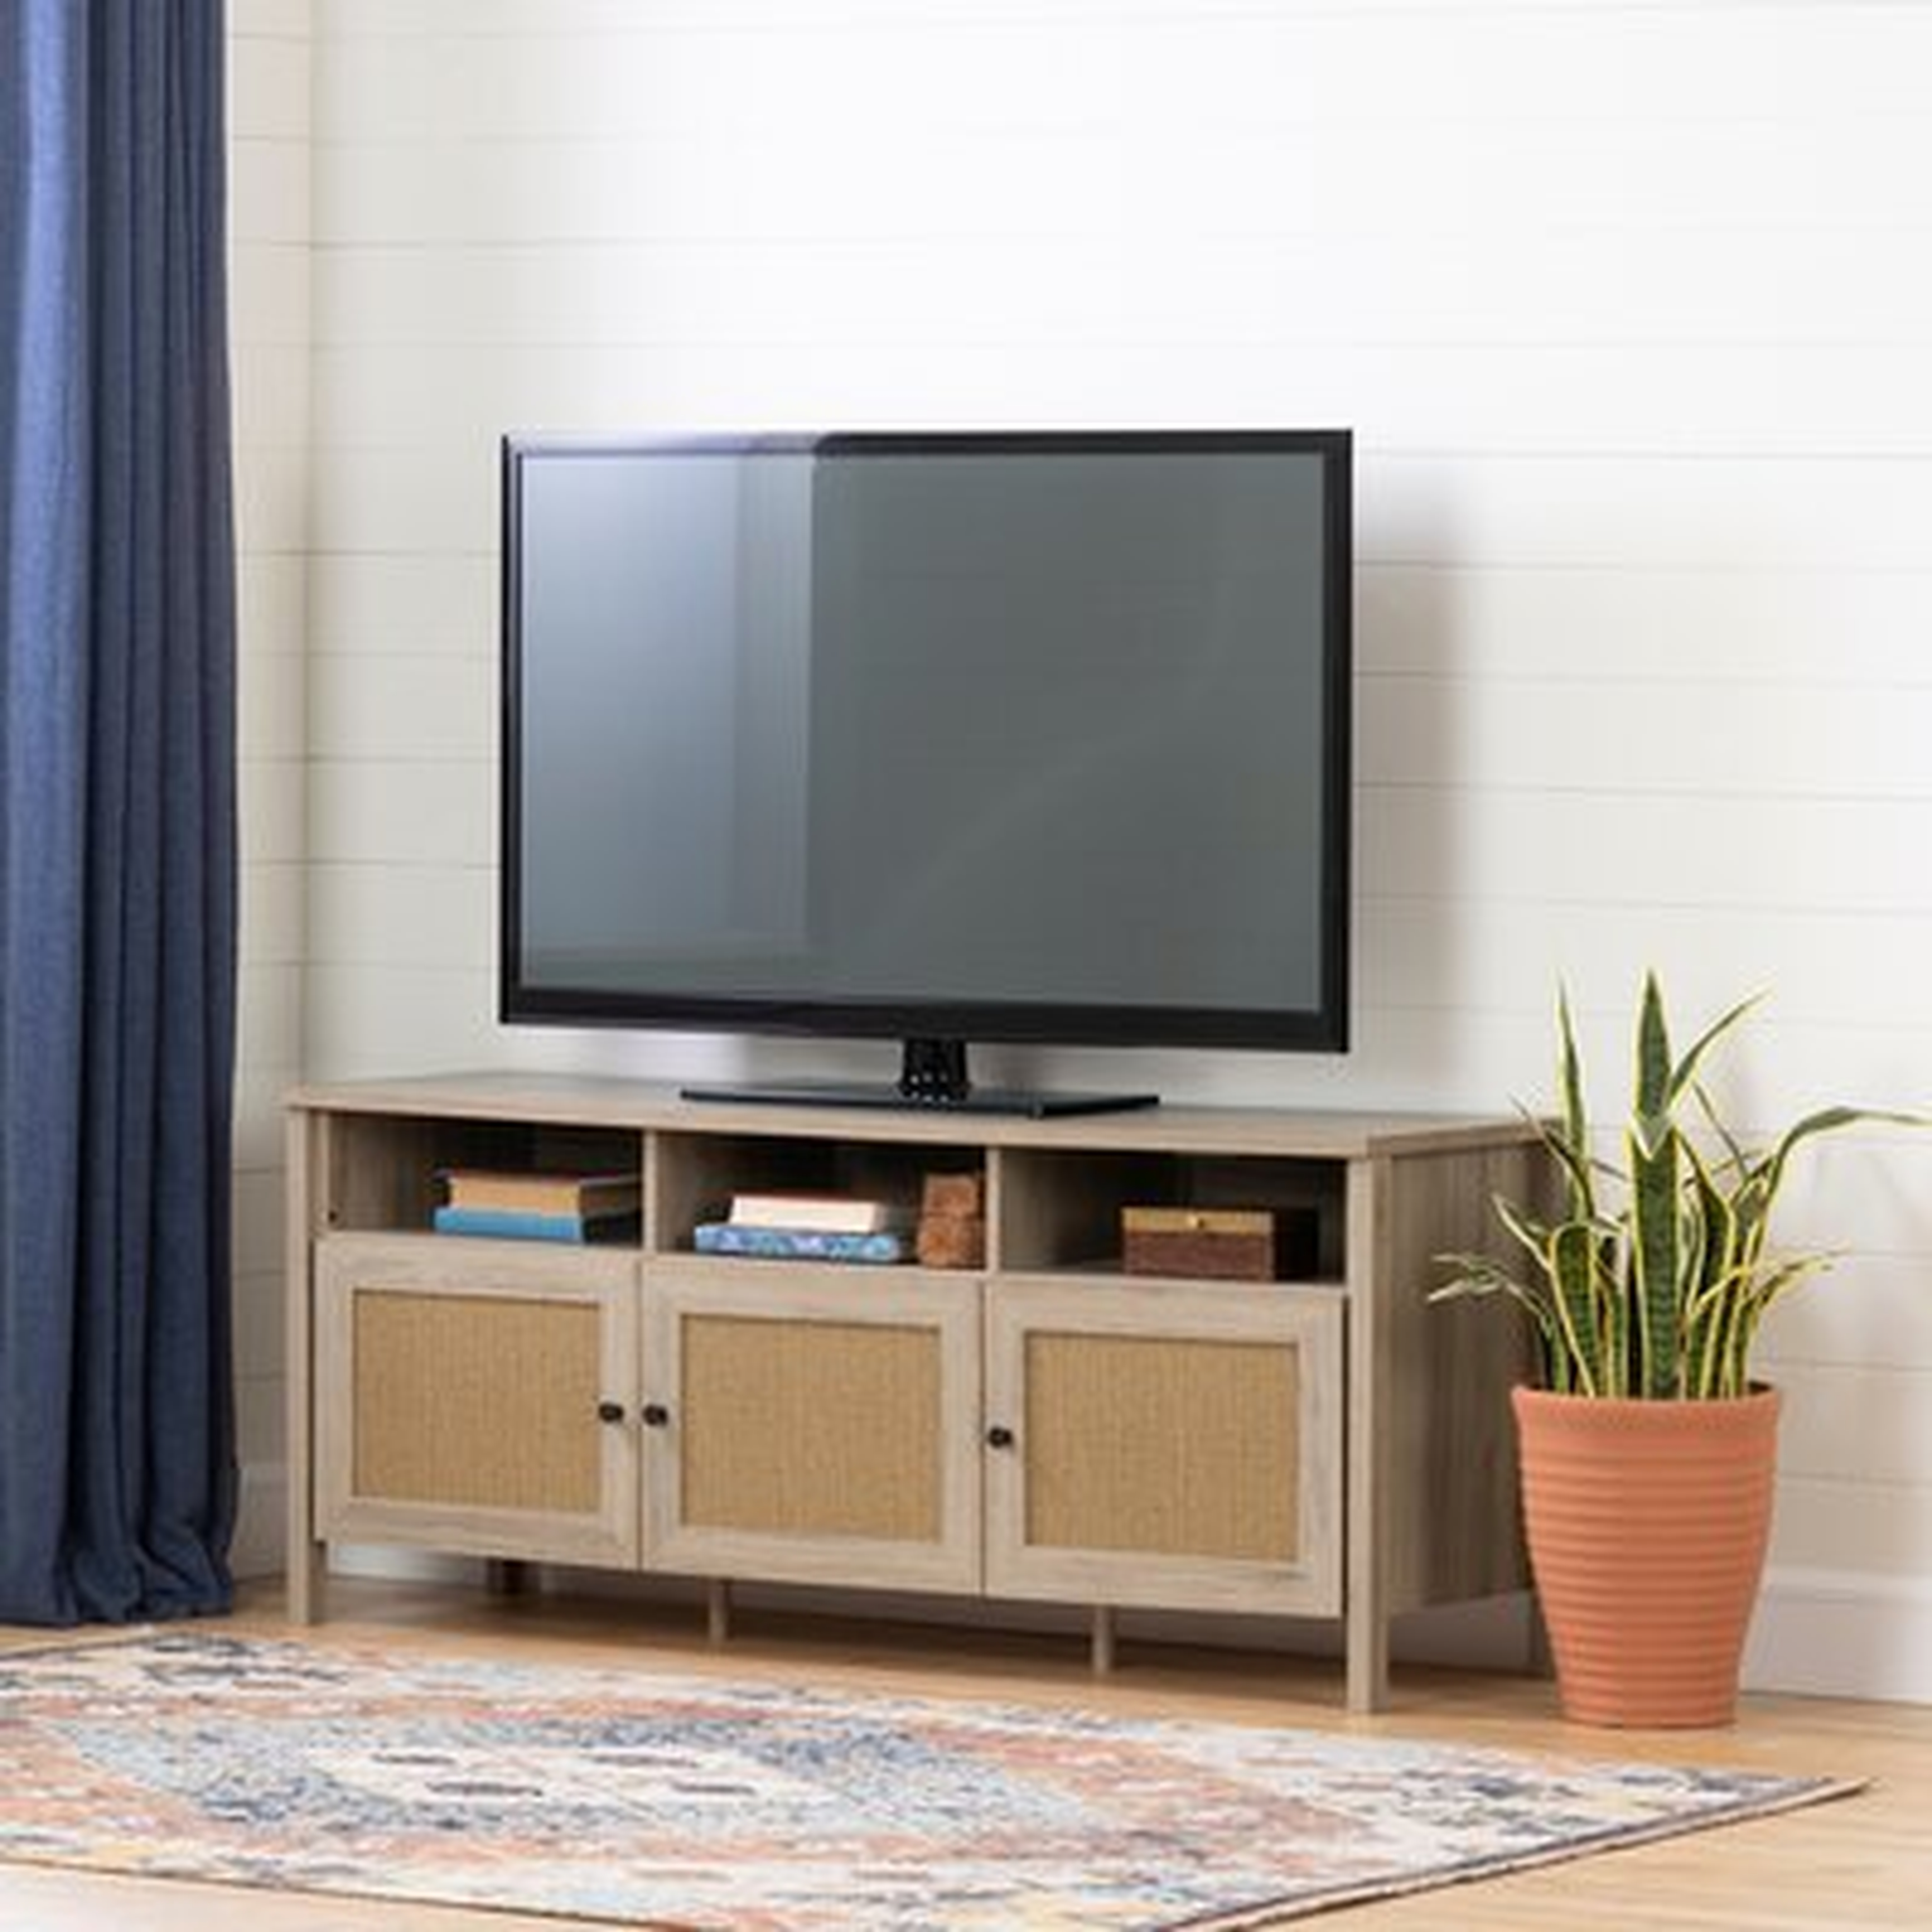 Balka TV Stand for TVs up to 60" - Wayfair